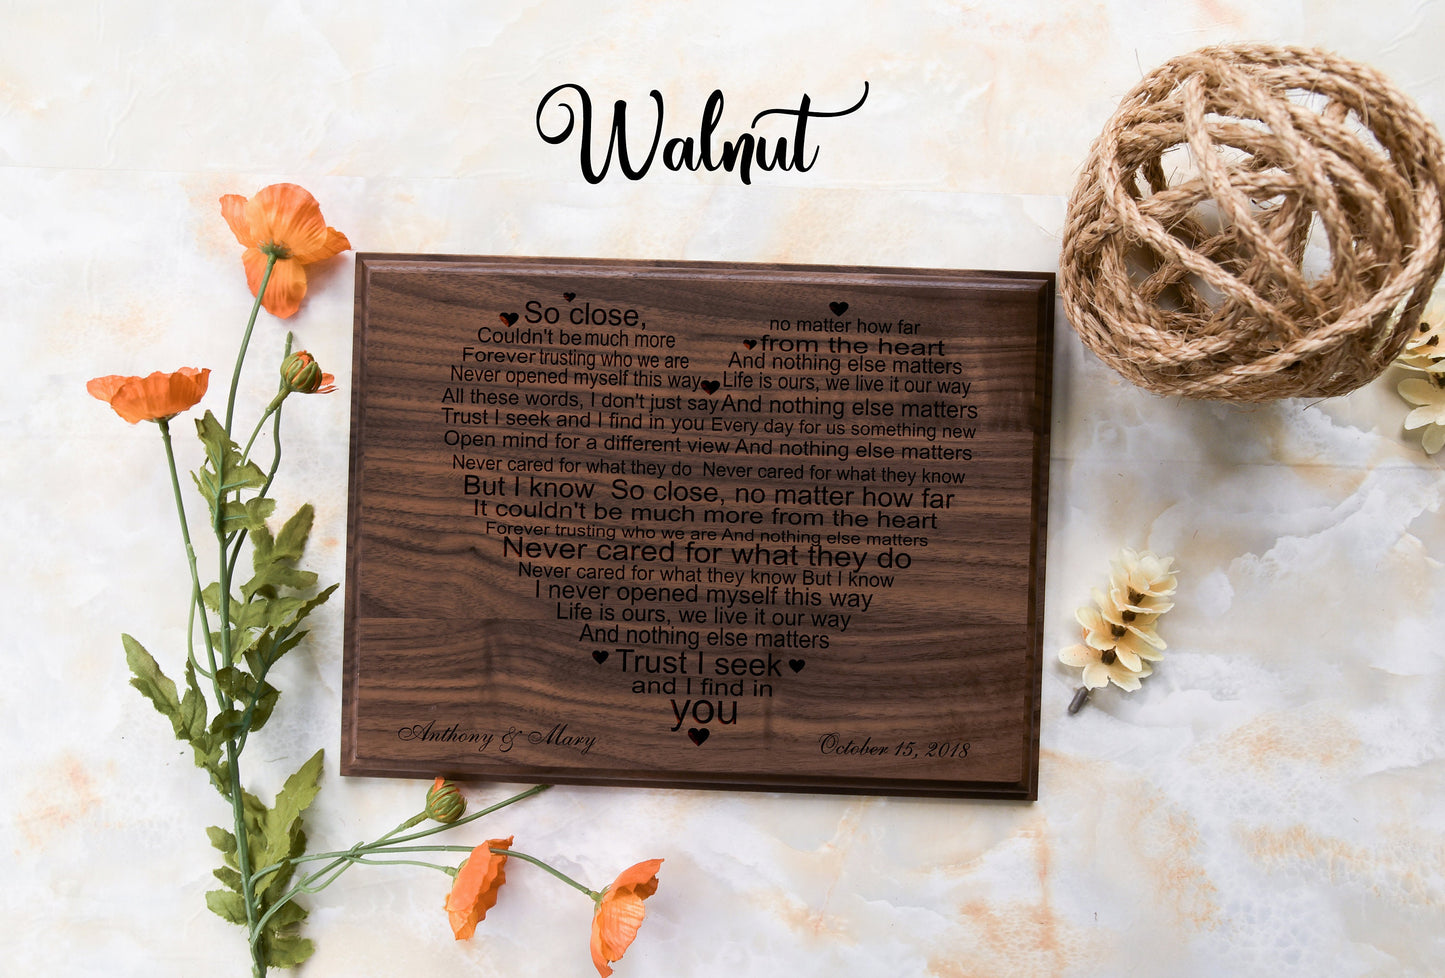 Personalized Plaque Heart Shaped Song, Love Poem, Anniversary Gift Idea, Wedding Gift Idea, Heart Shaped Couples Song, Wedding Vows, Newlywed Gift